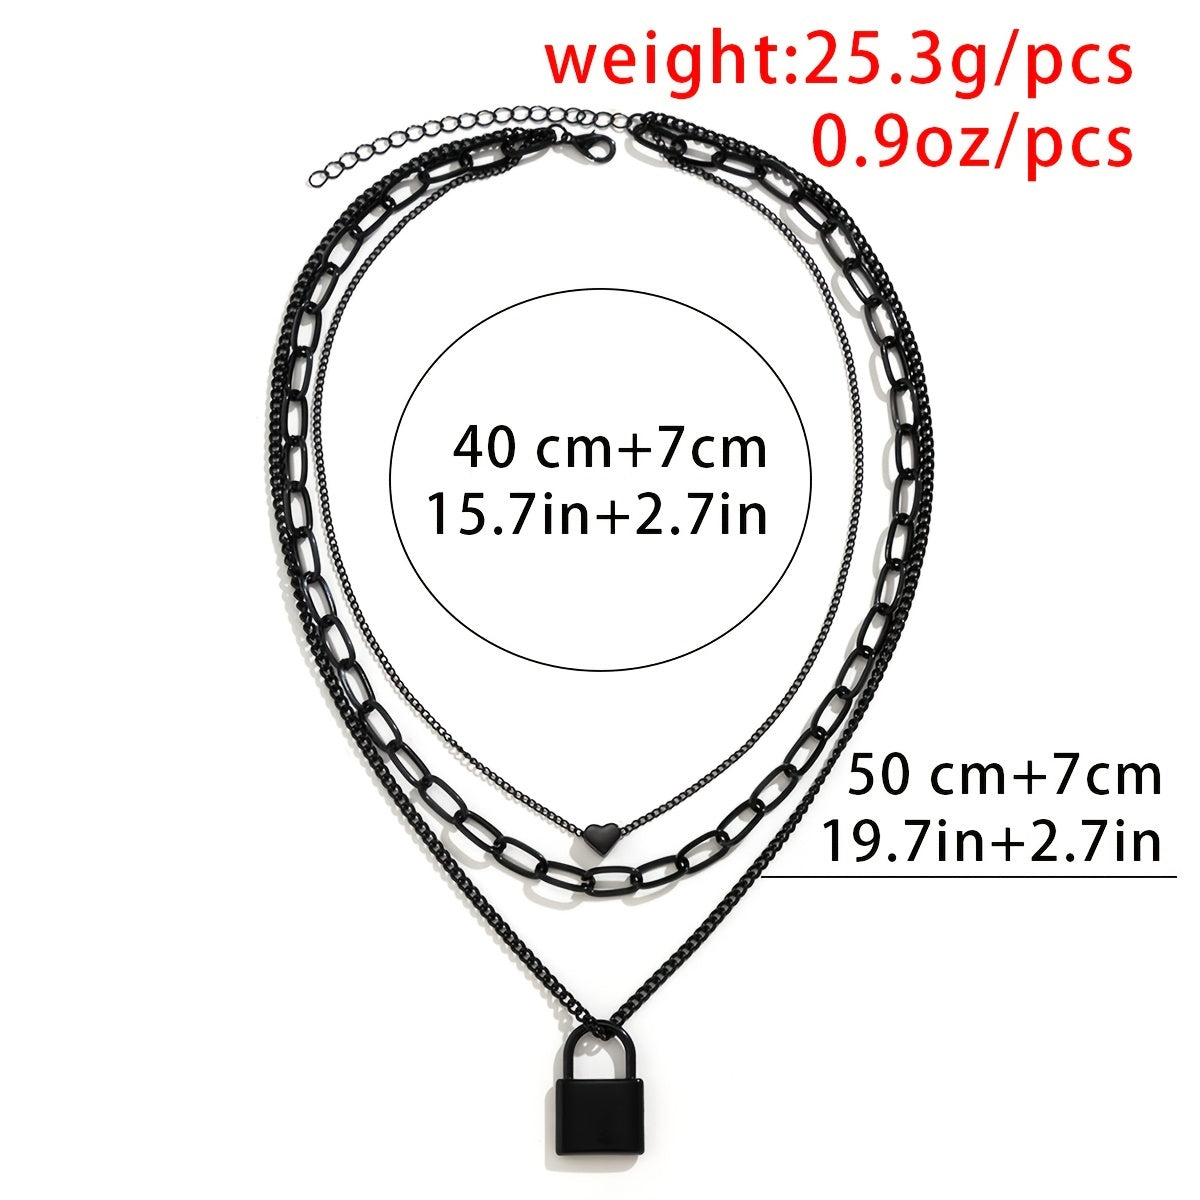 Punk-Style 1-Pc Three-Layer Chain Necklace with Heart & Lock Pendant - Adjustable for Clavicle - Black Leather Cord